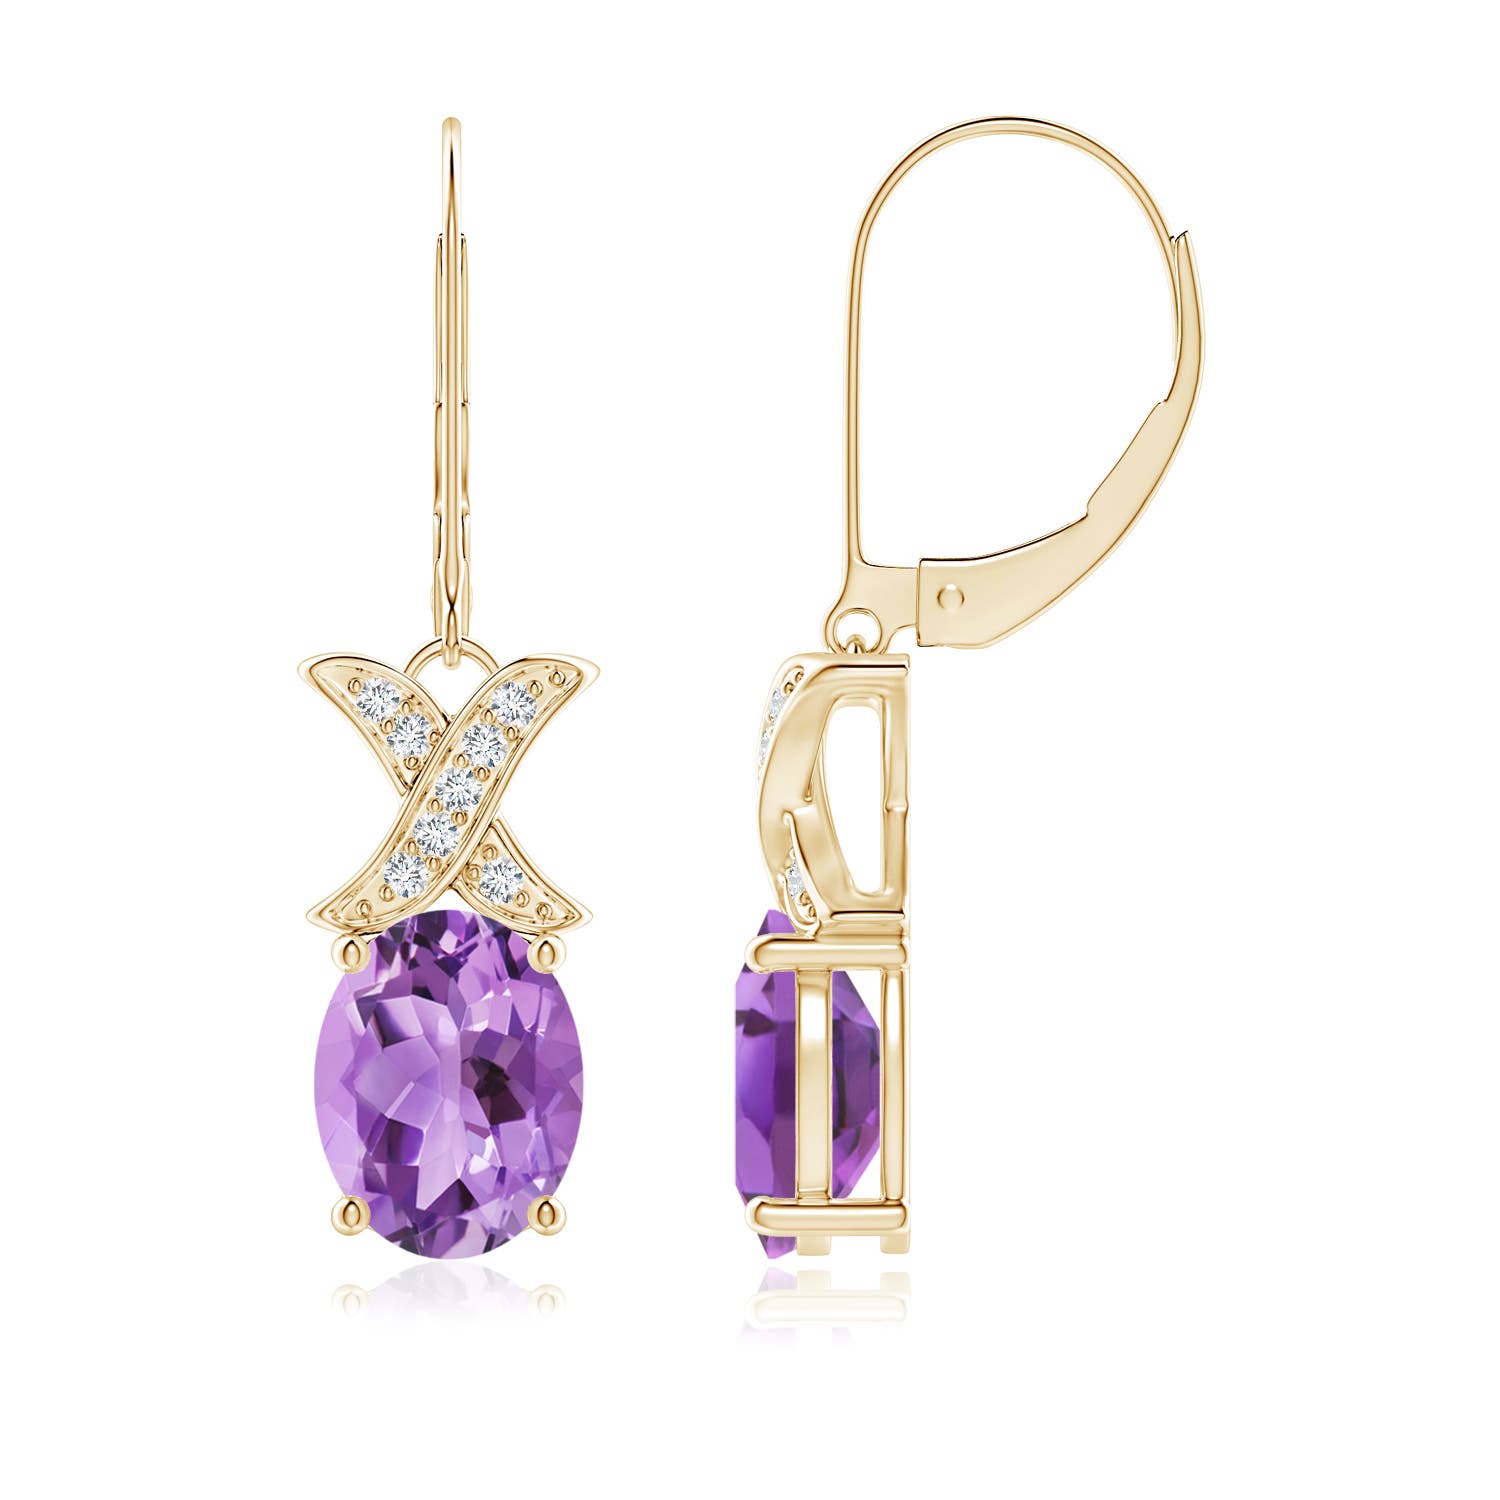 A - Amethyst / 3.3 CT / 14 KT Yellow Gold